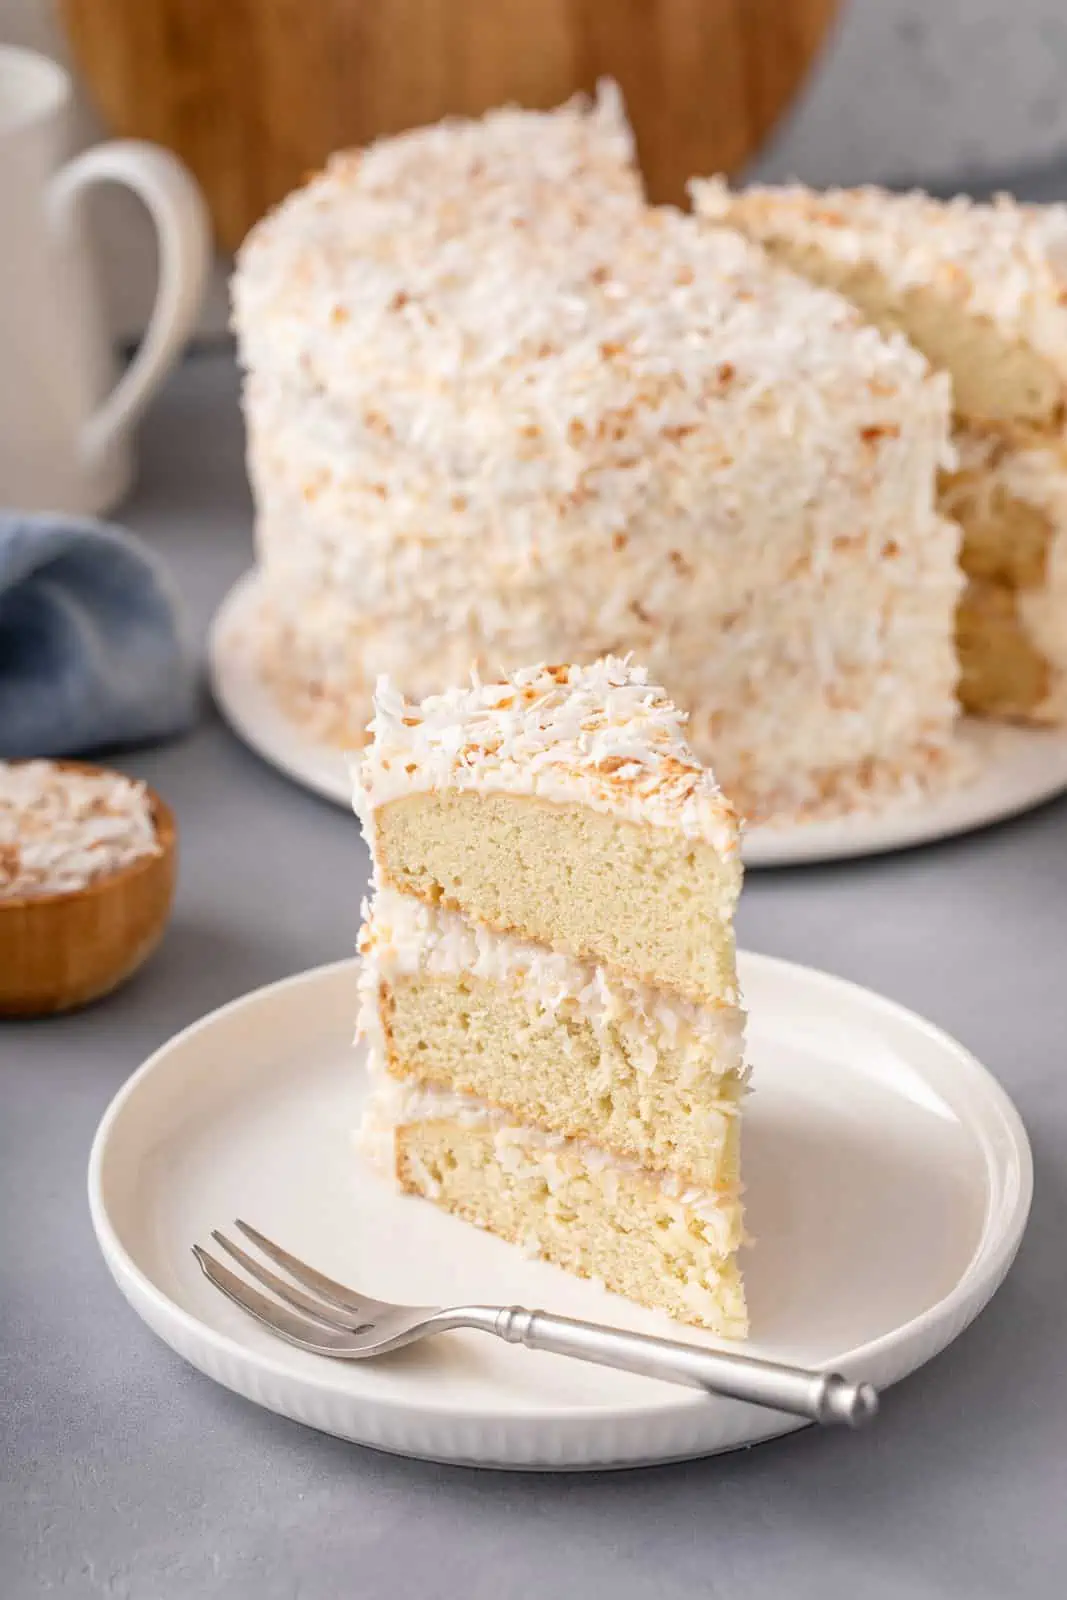 Slice of coconut cake on a white plate with the rest of the cake in the background.